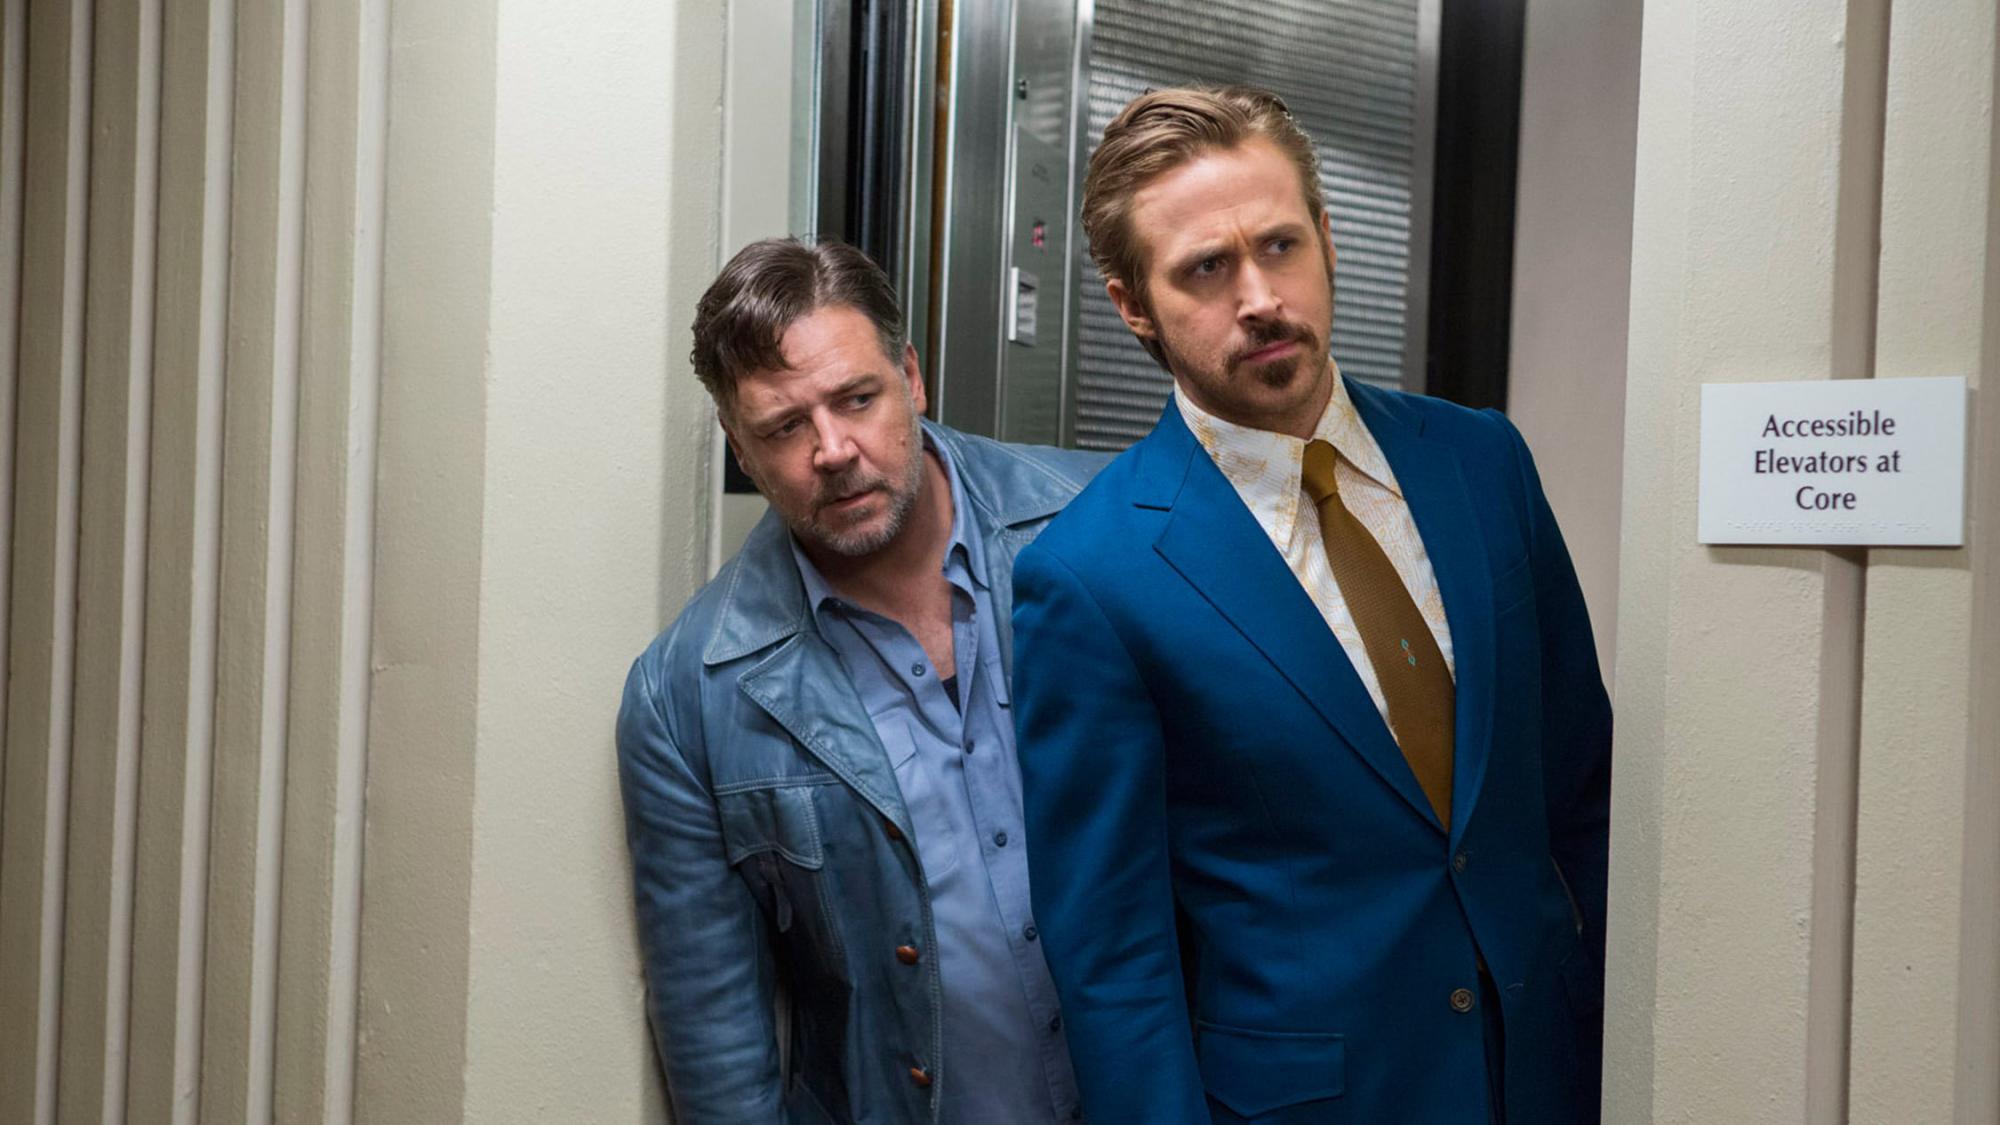 Backdrop Image for The nice guys